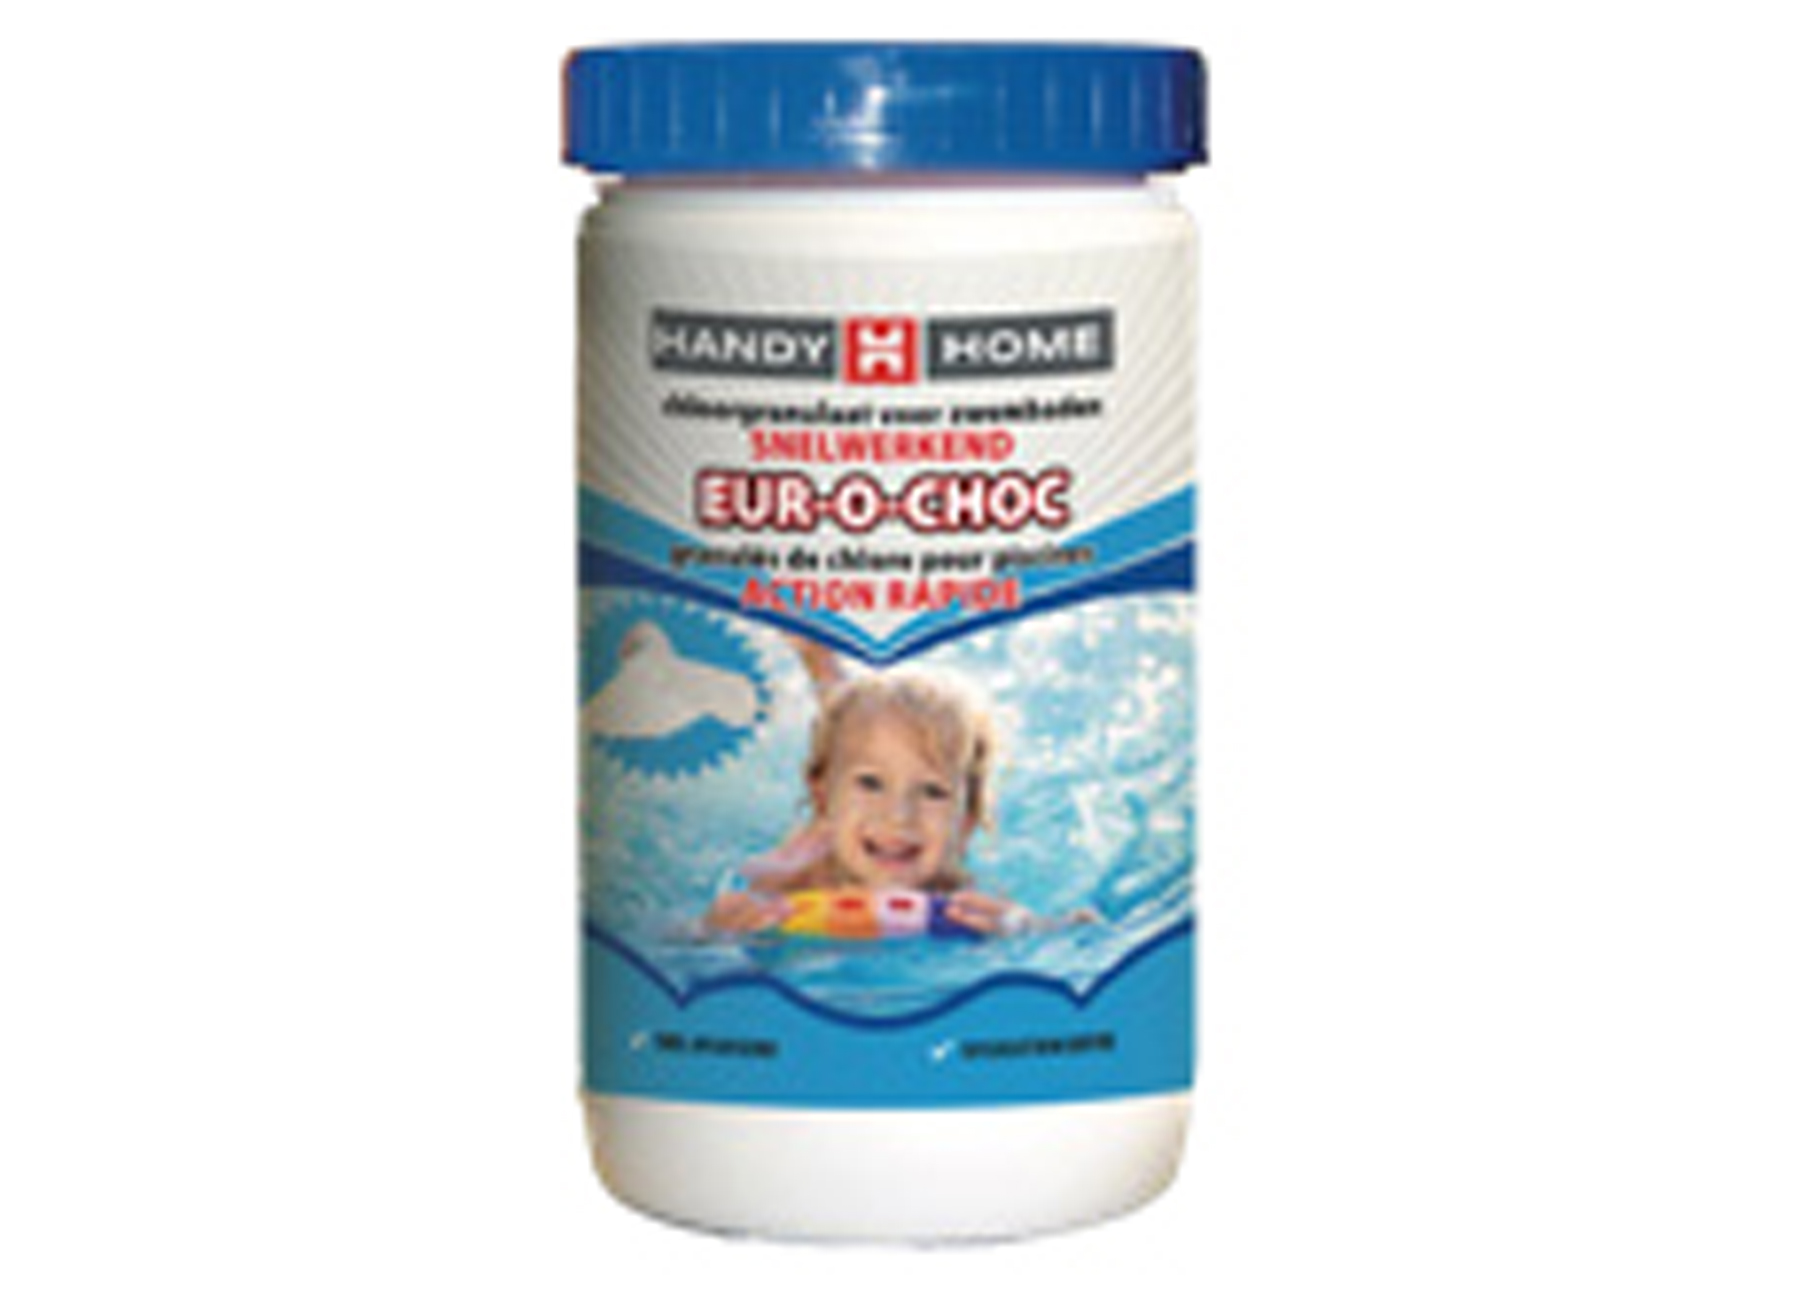 HANDYHOME EUR-O-CHOC CHLORE ACTION RAPIDE 1KG